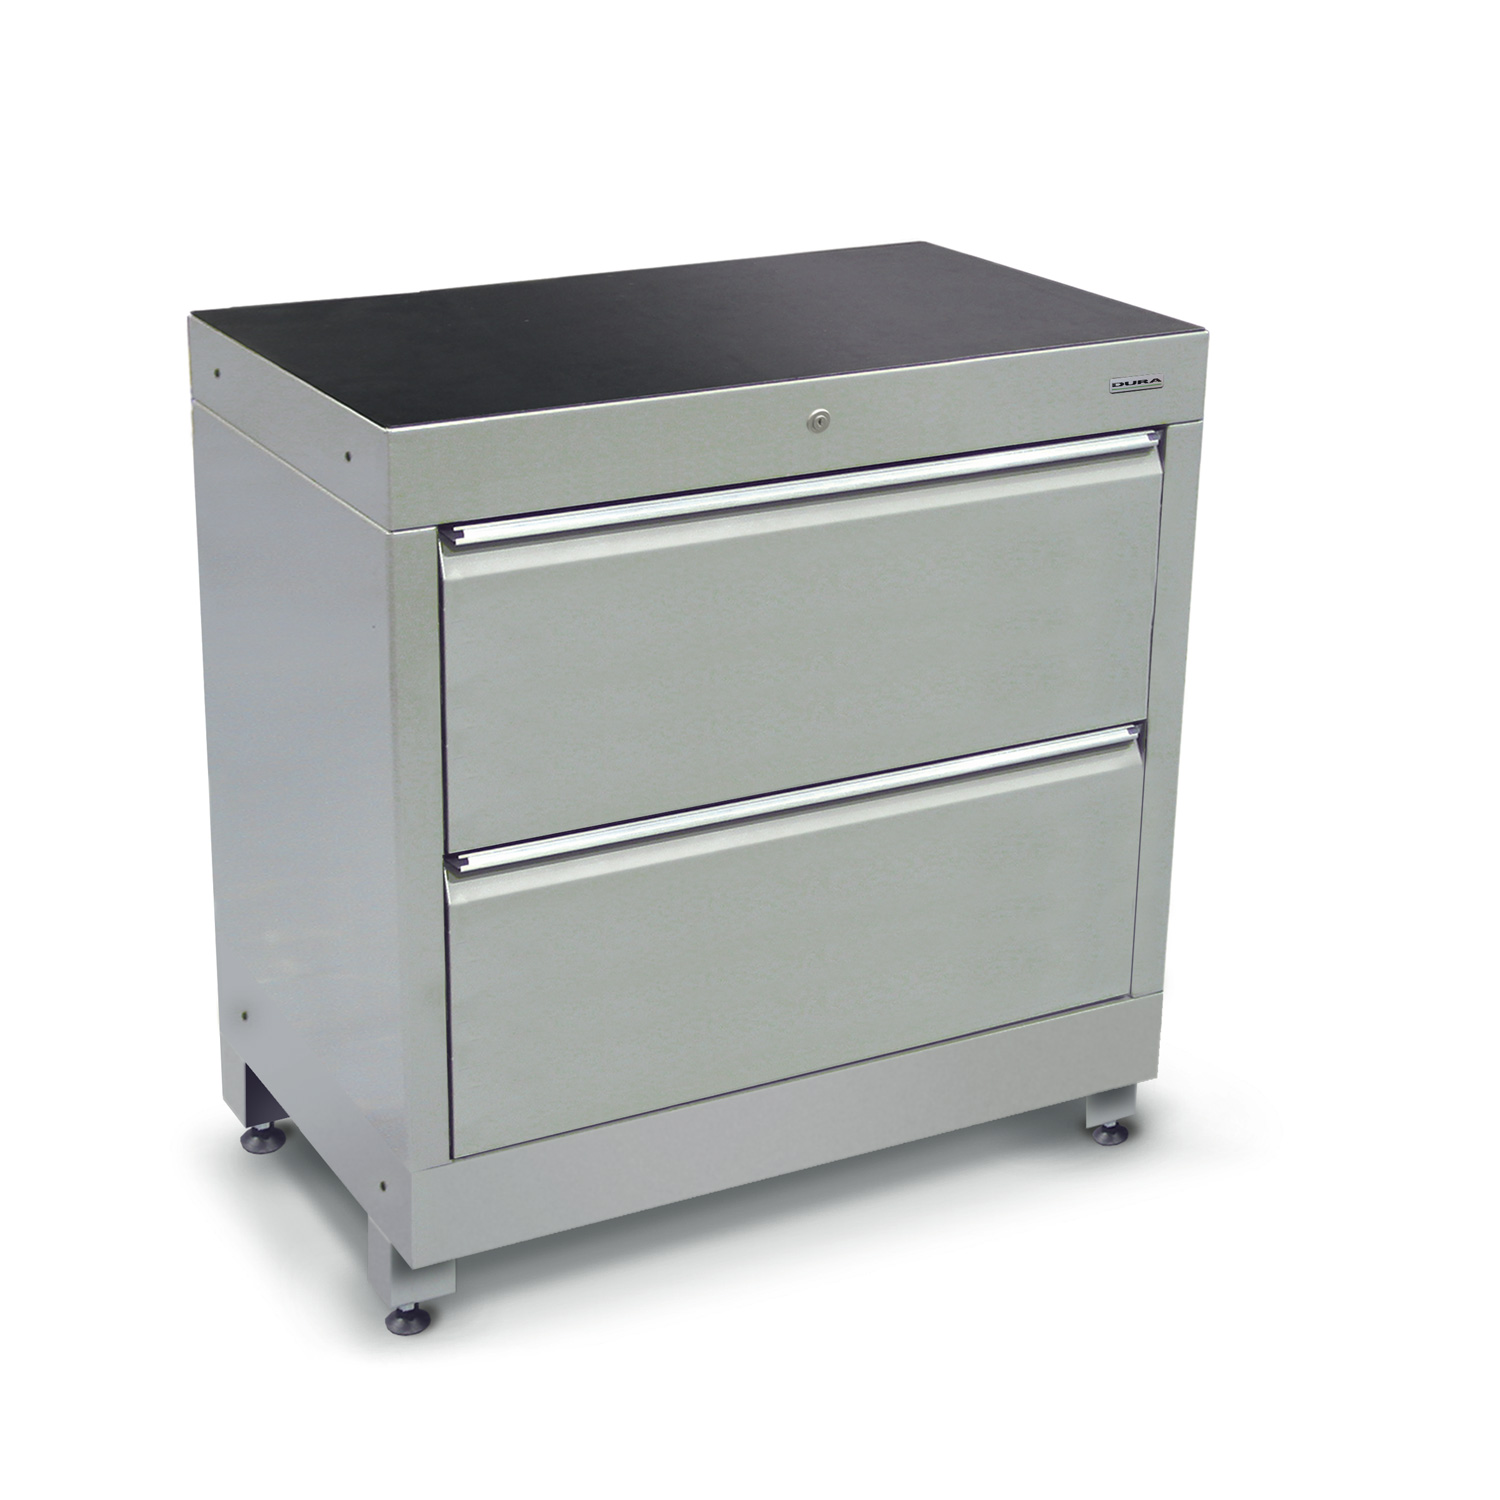 900 series tool cabinet with an additional inner sliding tray (2 drawers)